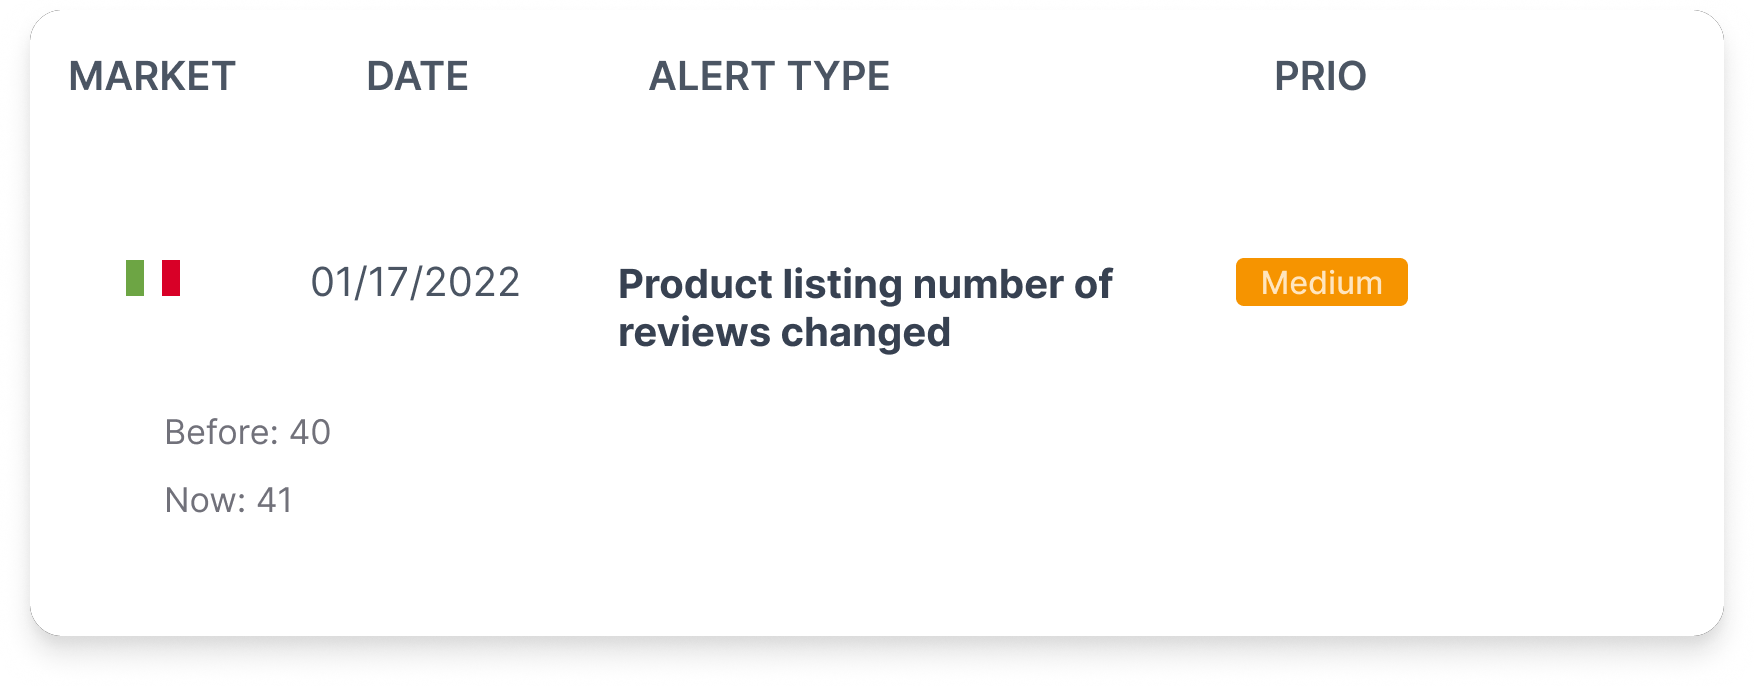 Amazon alert Product listing number of reviews changed additional information